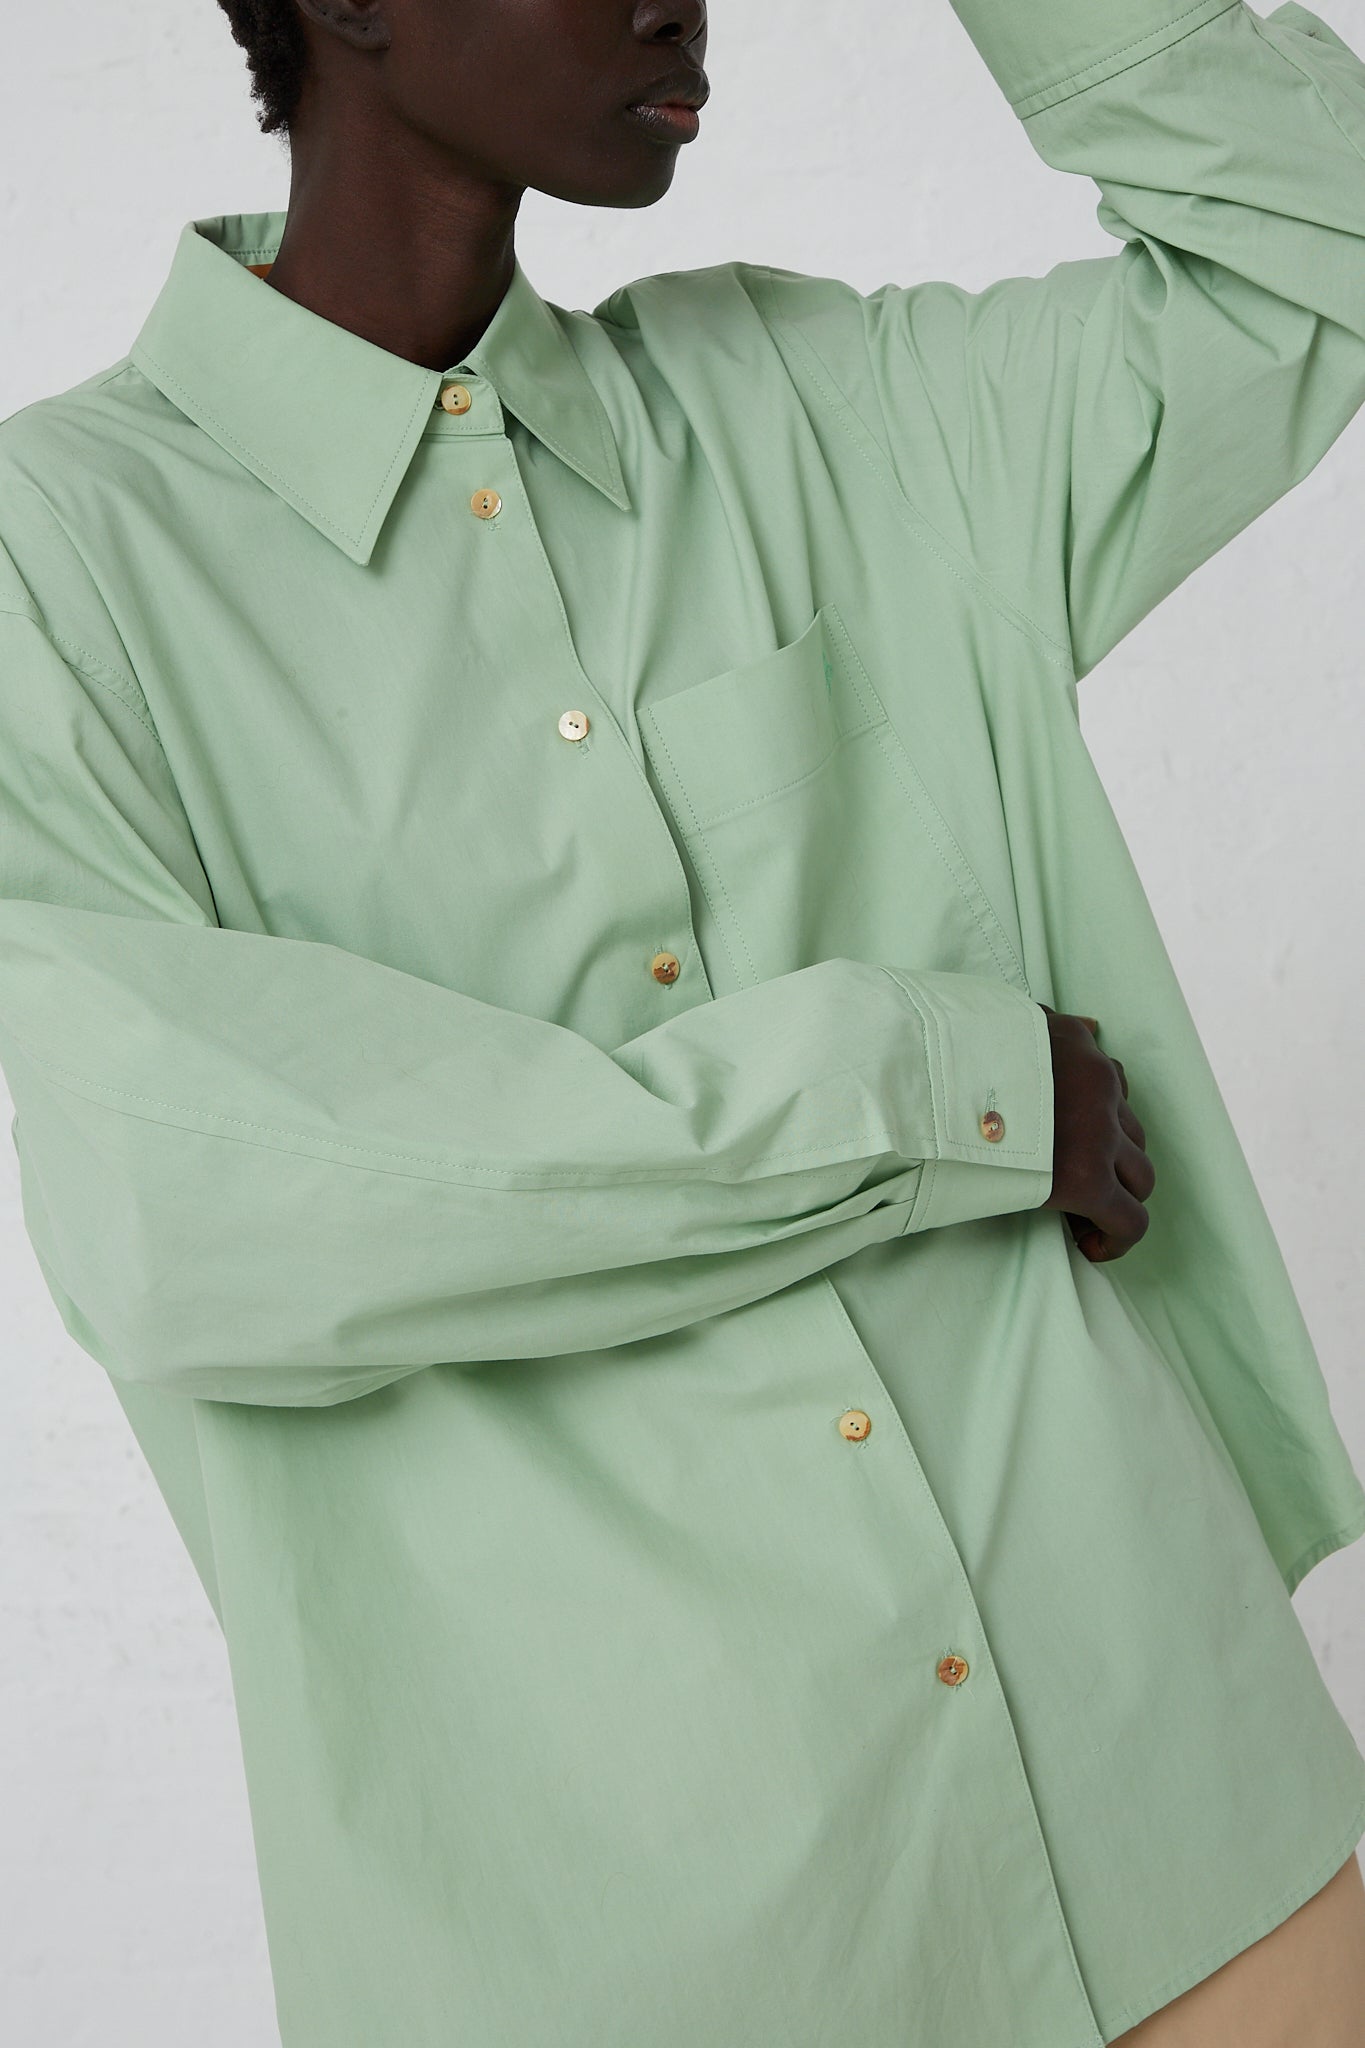 The model is wearing a Rejina Pyo Organic Cotton Caprice Shirt in Mint with a front button closure.